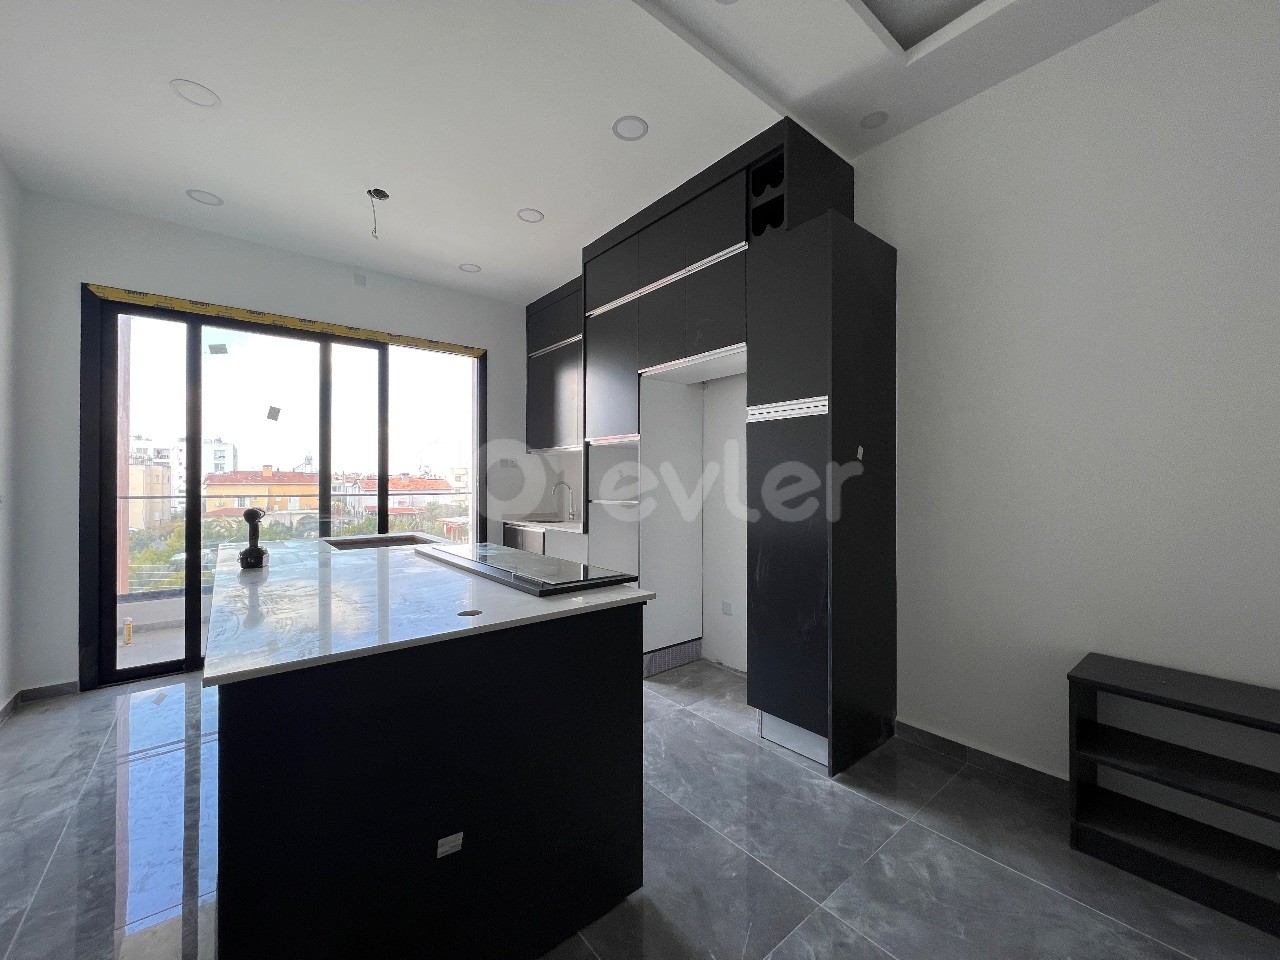 2+1 ENSUITE LUXURY APARTMENT WITH PRICES STARTING FROM 66,400 GBP IN LEFKOŞA/GÖNYELI AREA